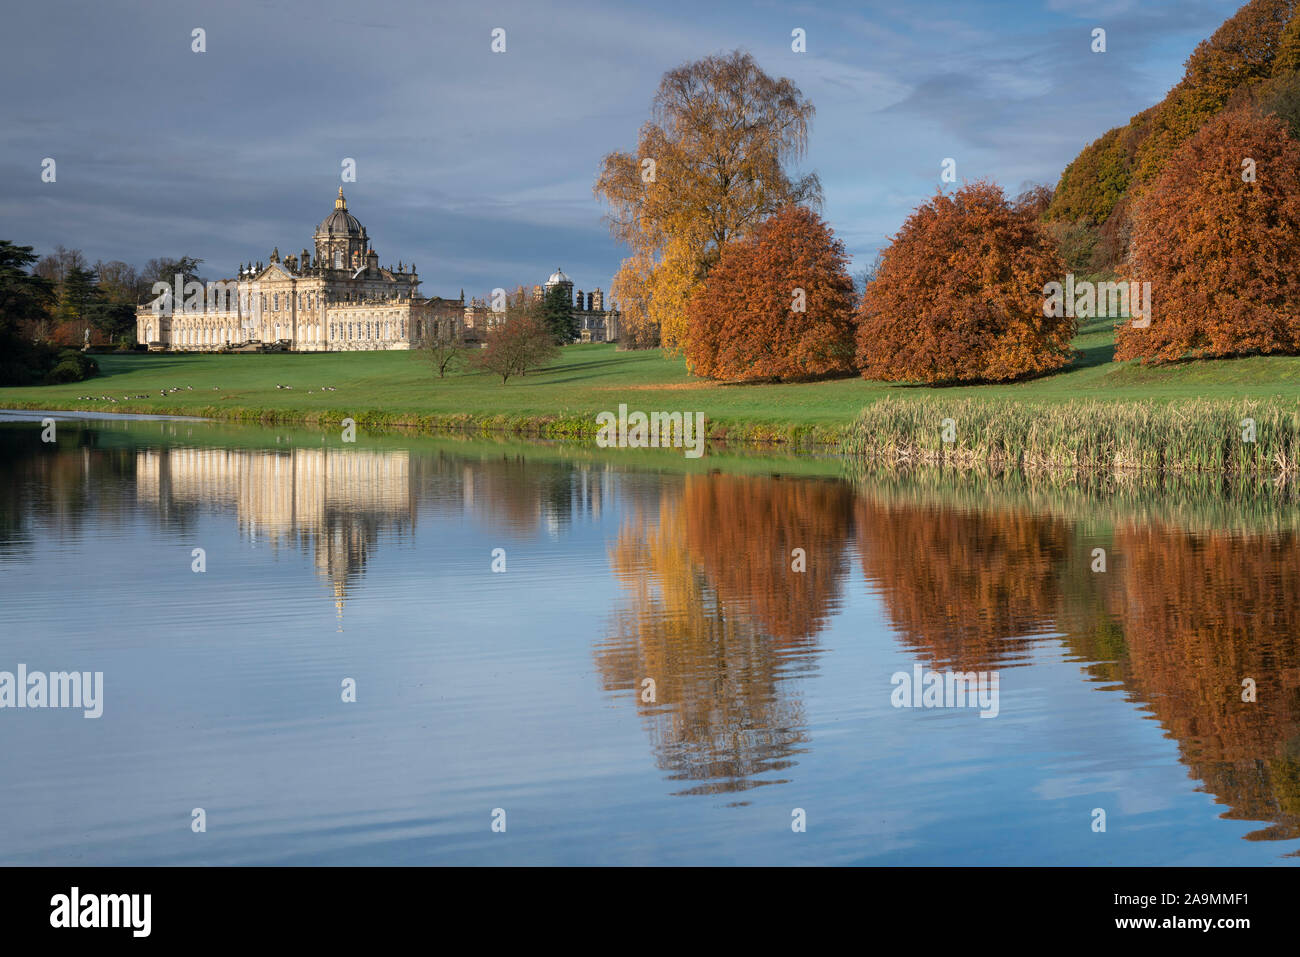 Autumn trees reflected in the lake at Castle Howard, UK. Stock Photo